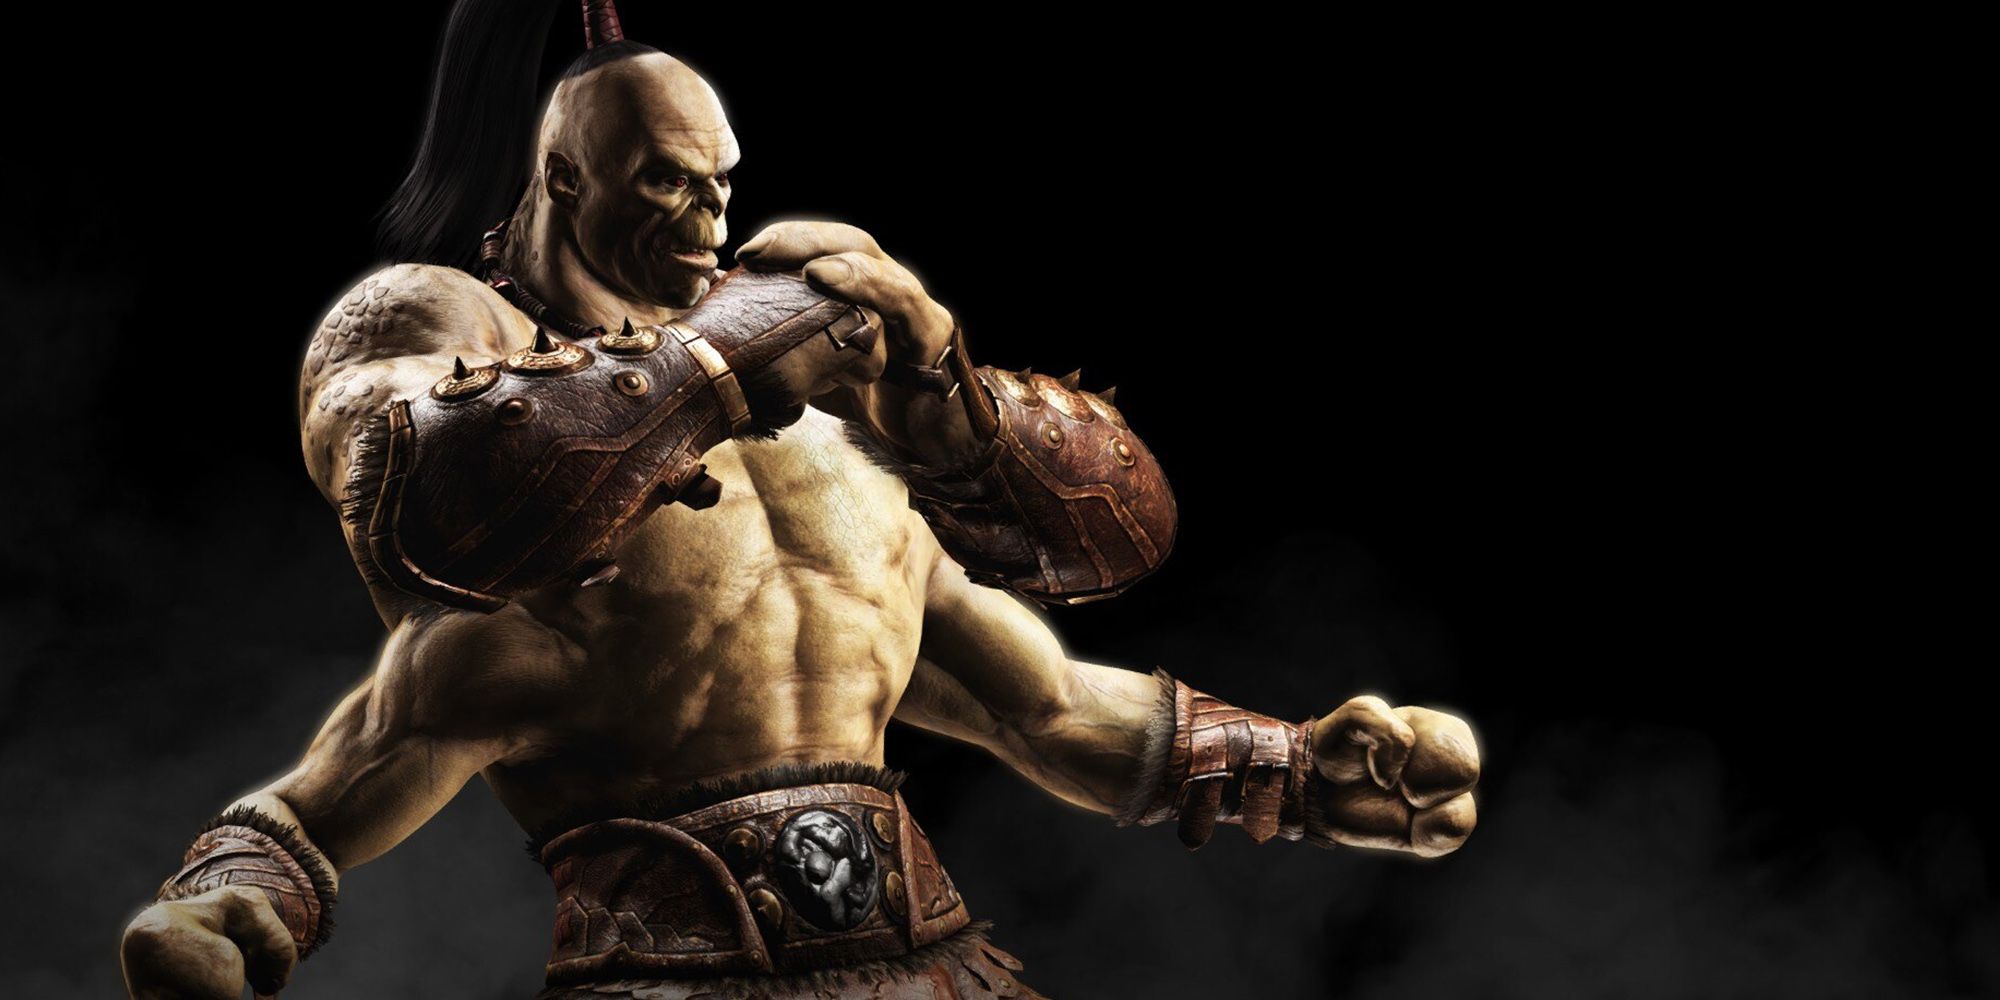 Mortal Kombat - Goro Getting Ready For A Fight In The Loading Screen